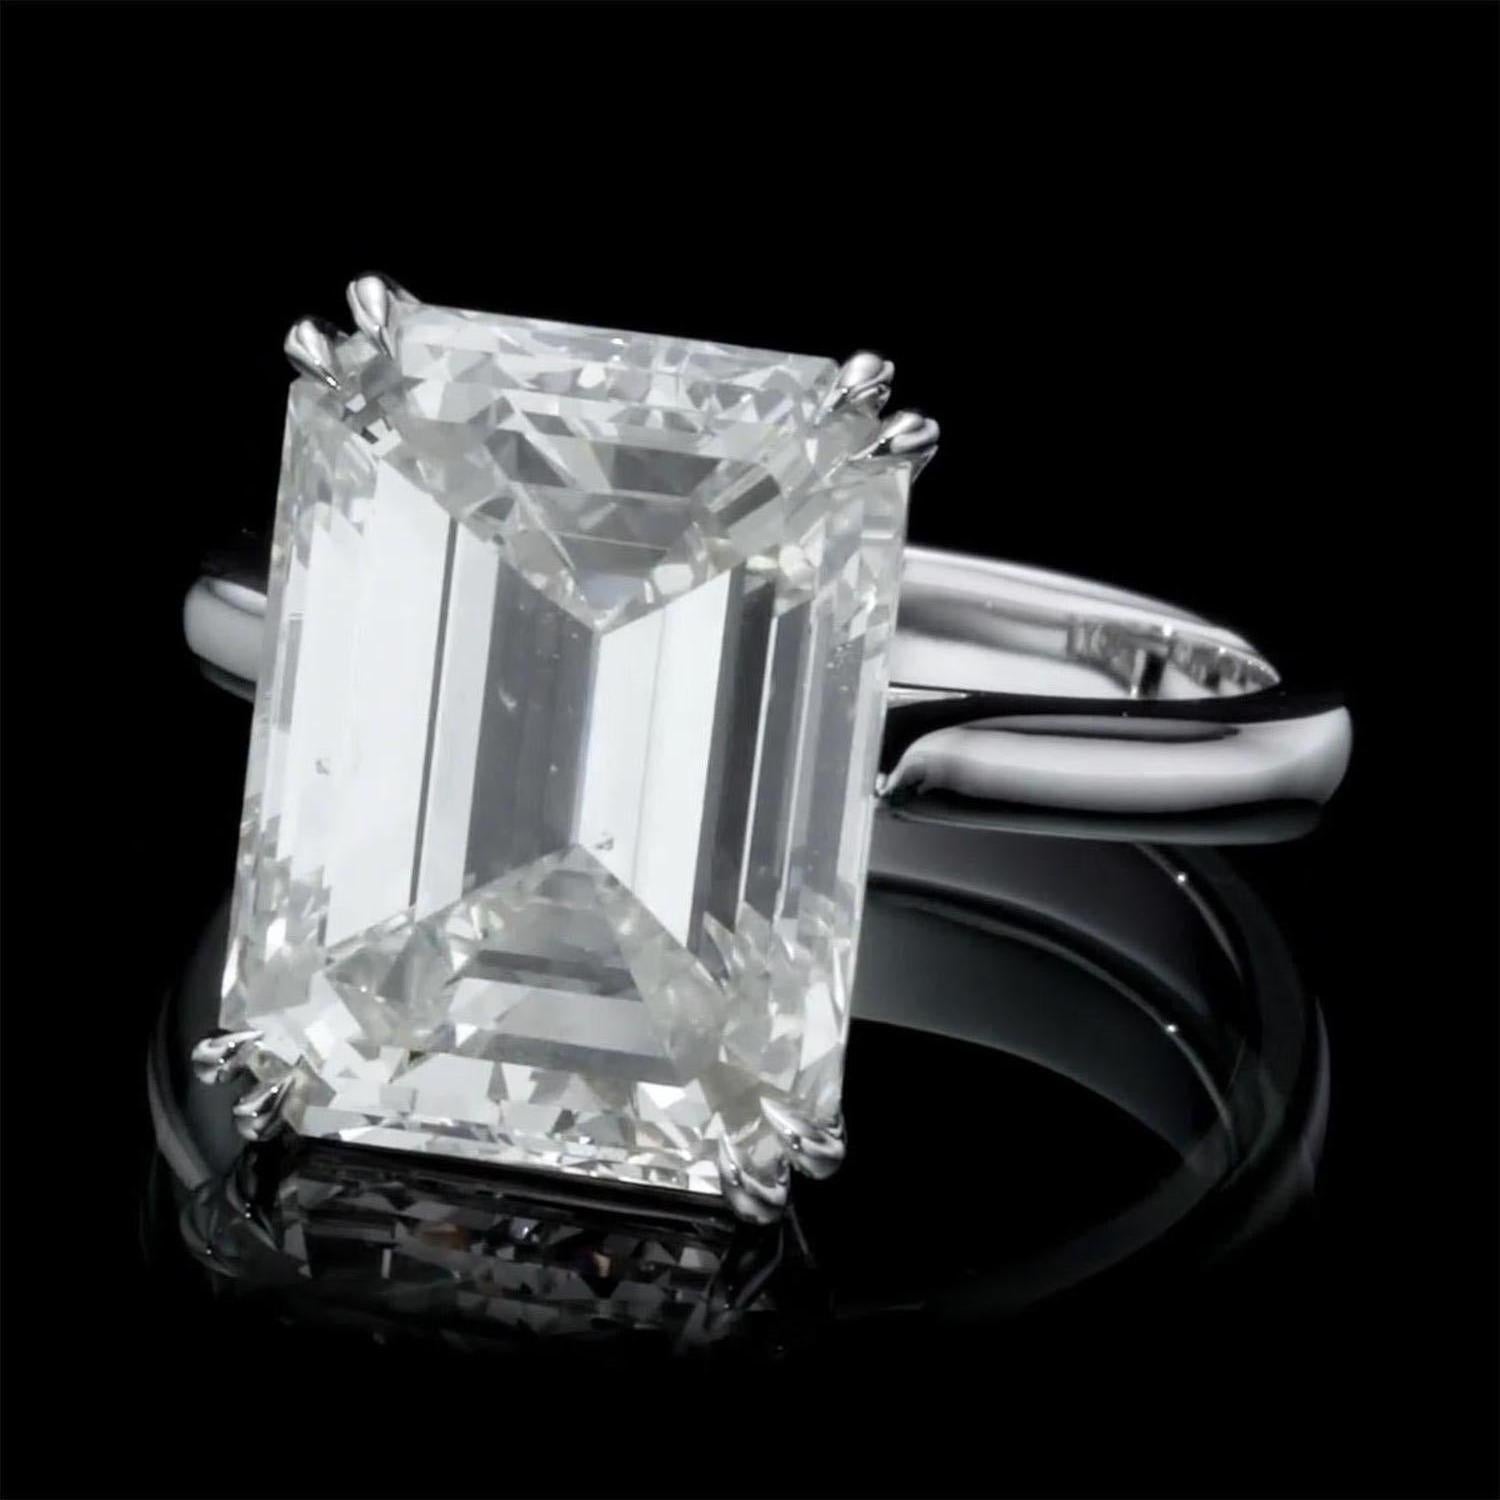 10.05 Carat Natural Diamond Ring Emerald Cut Color L Clarity SI1 For Sale 3